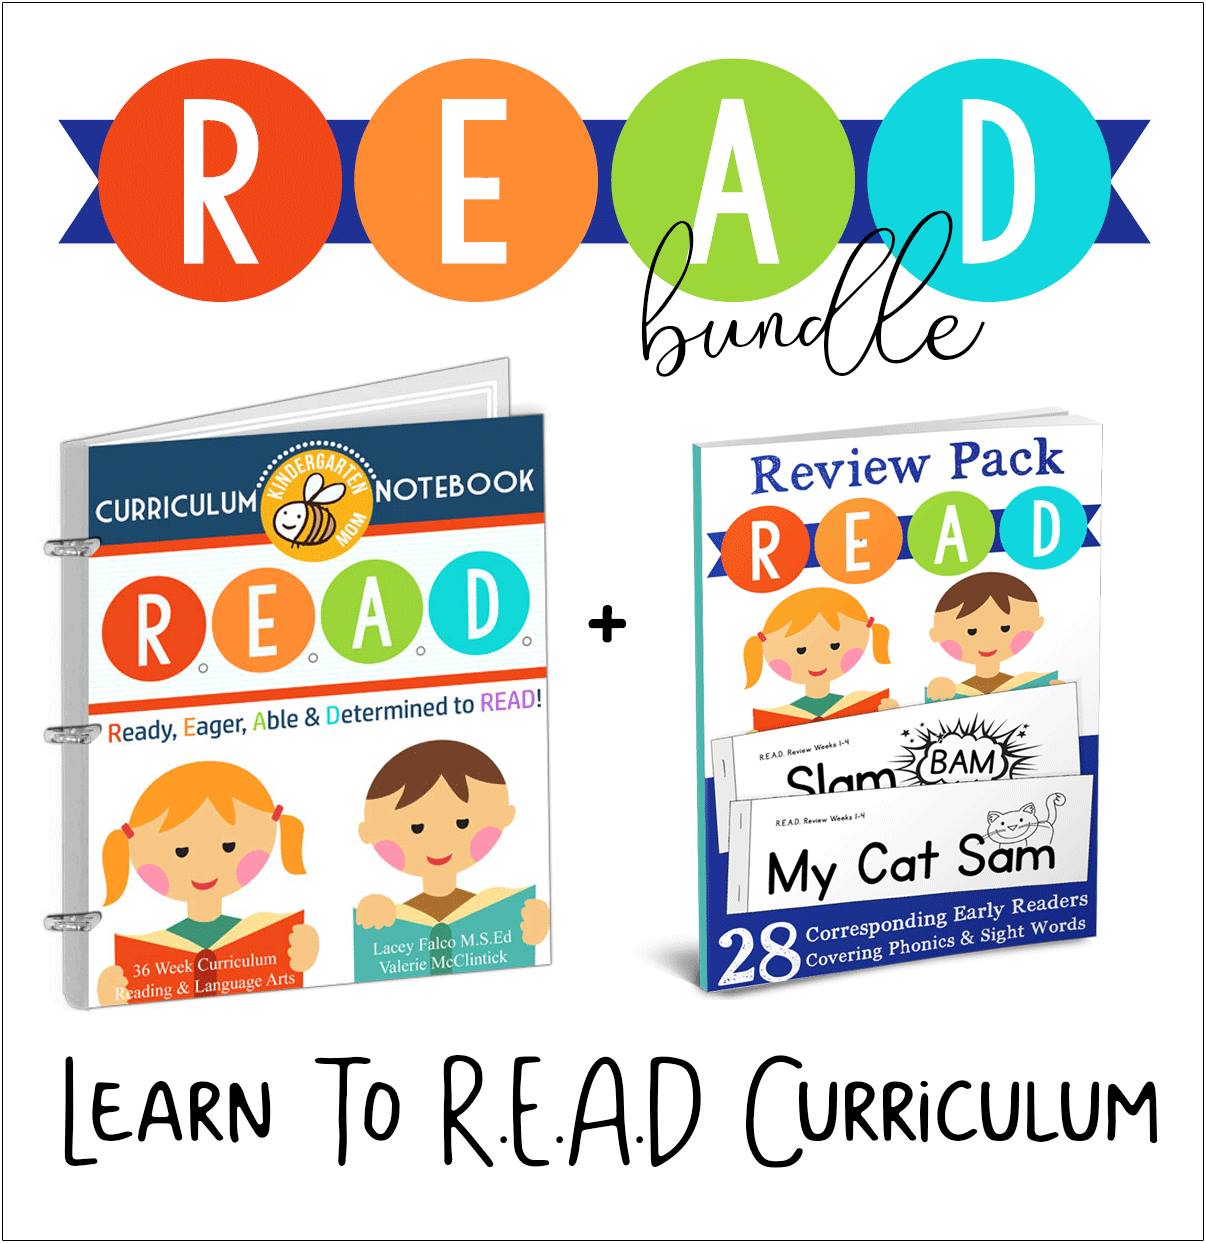 Giveaway: Crafty Classroom R.E.A.D. Curriculum Notebook & Review Pack ($40 value)